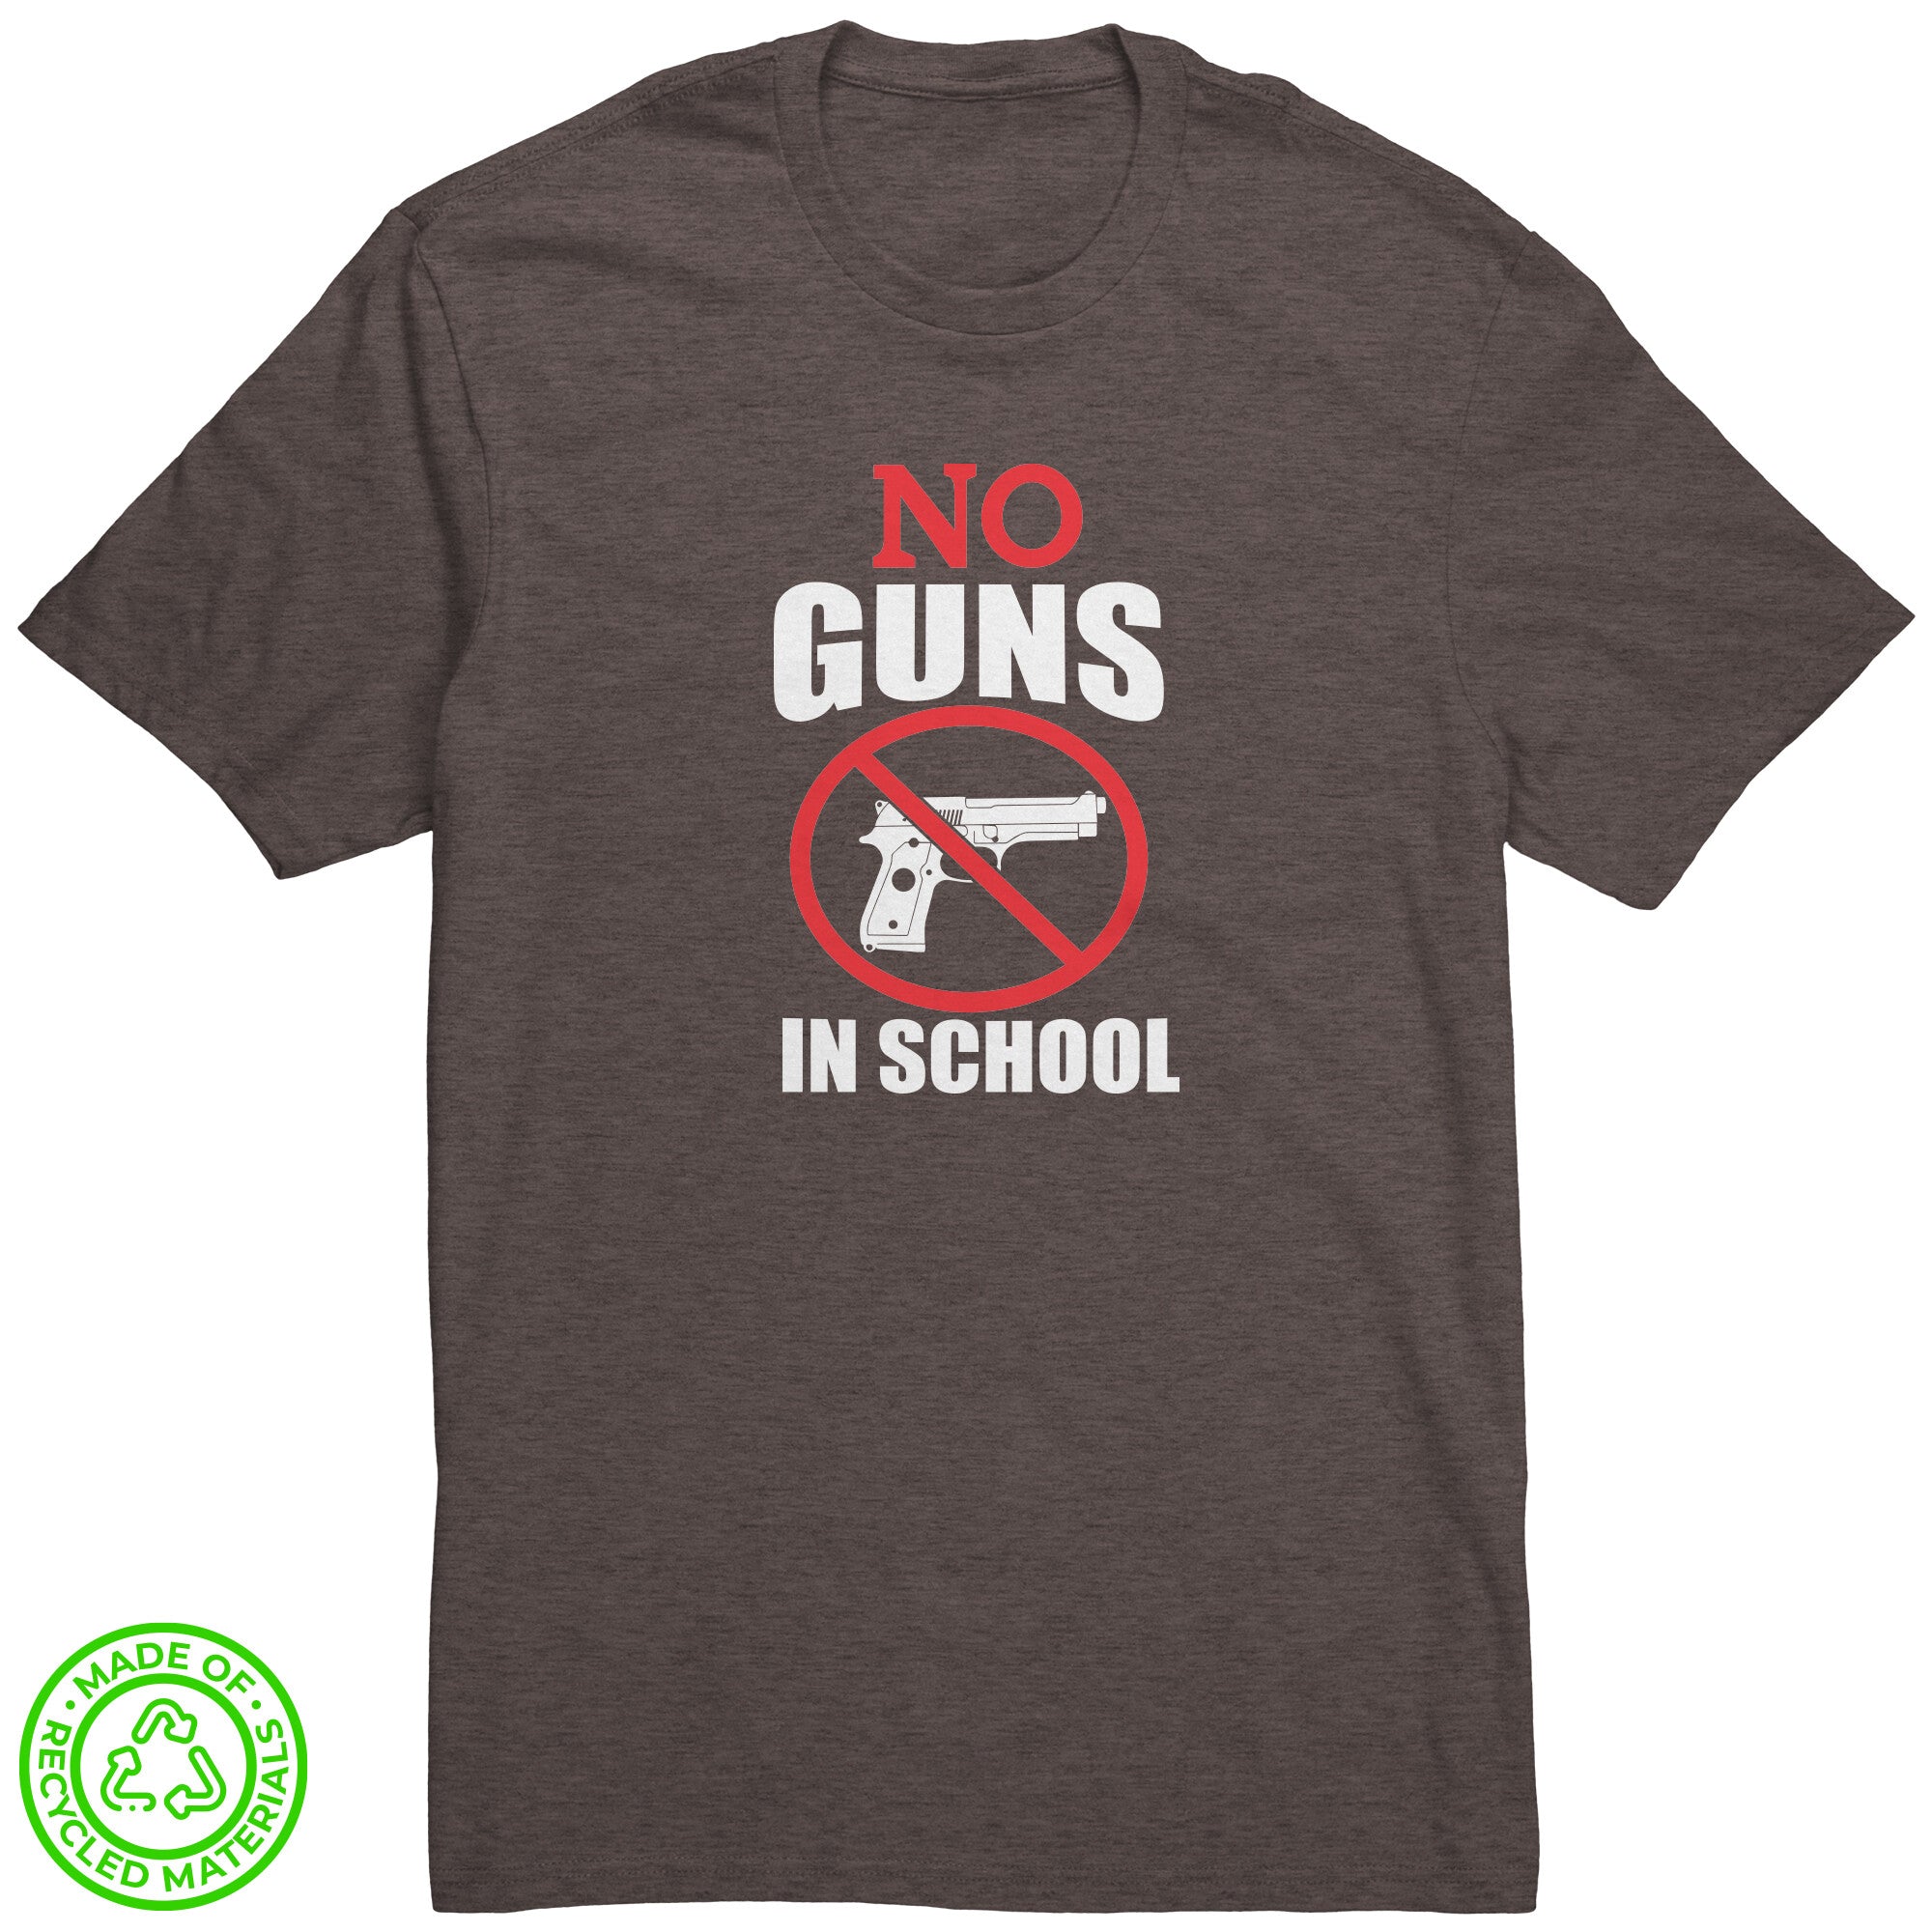 No Guns in School 100% Recycled Protest T-Shirt